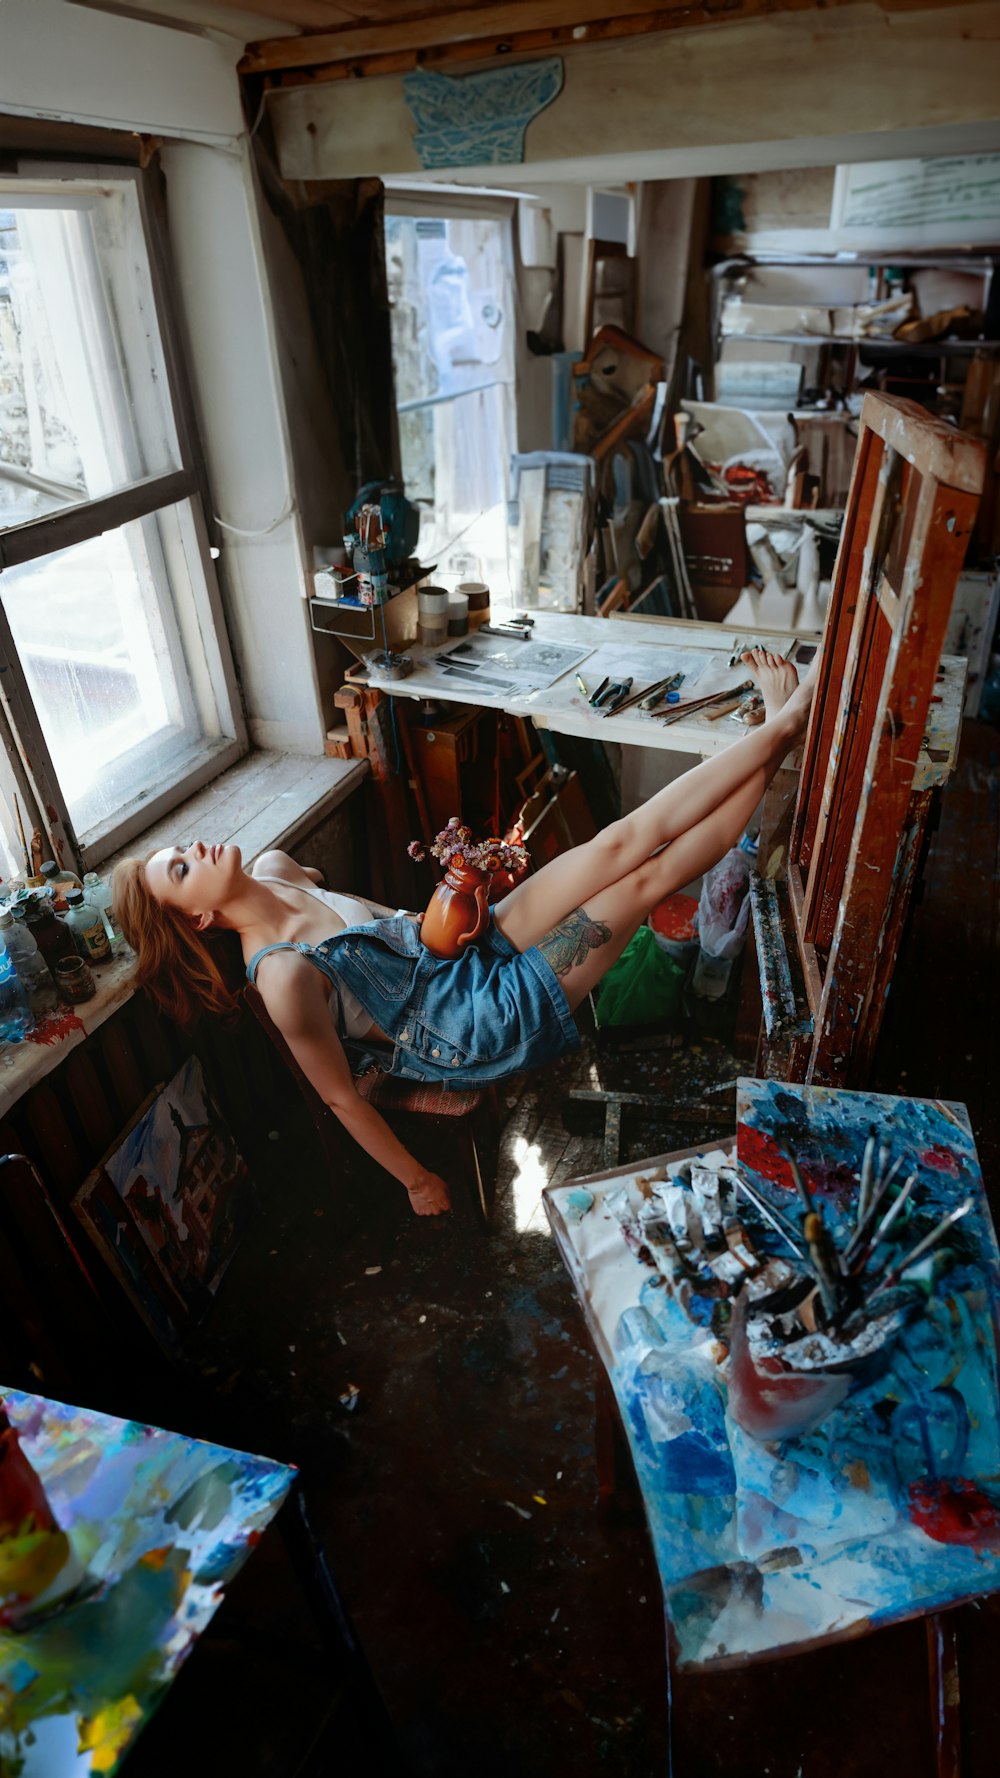 a woman laying on a chair in a messy room